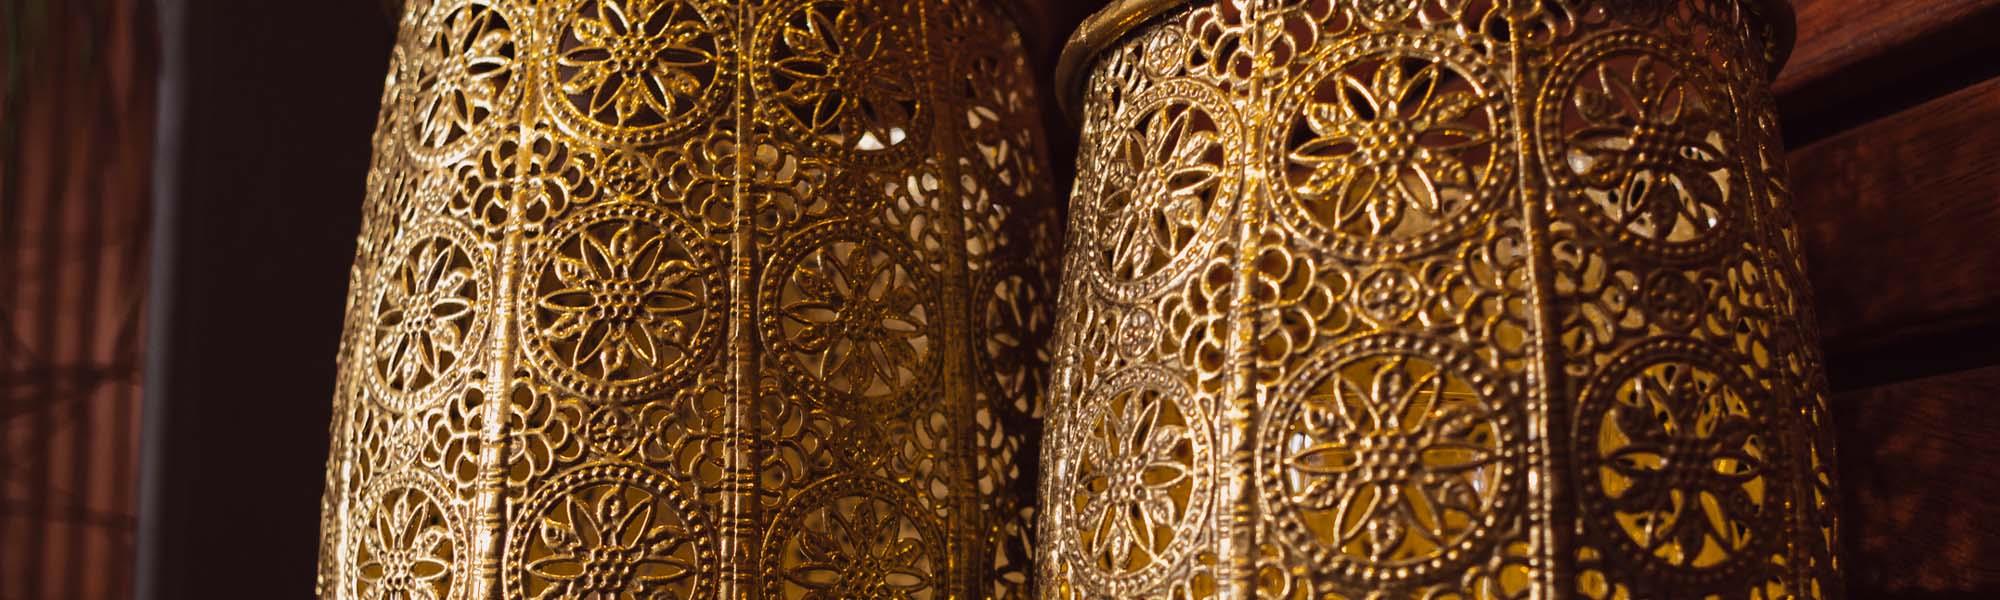 beautiful gold vases with pattern